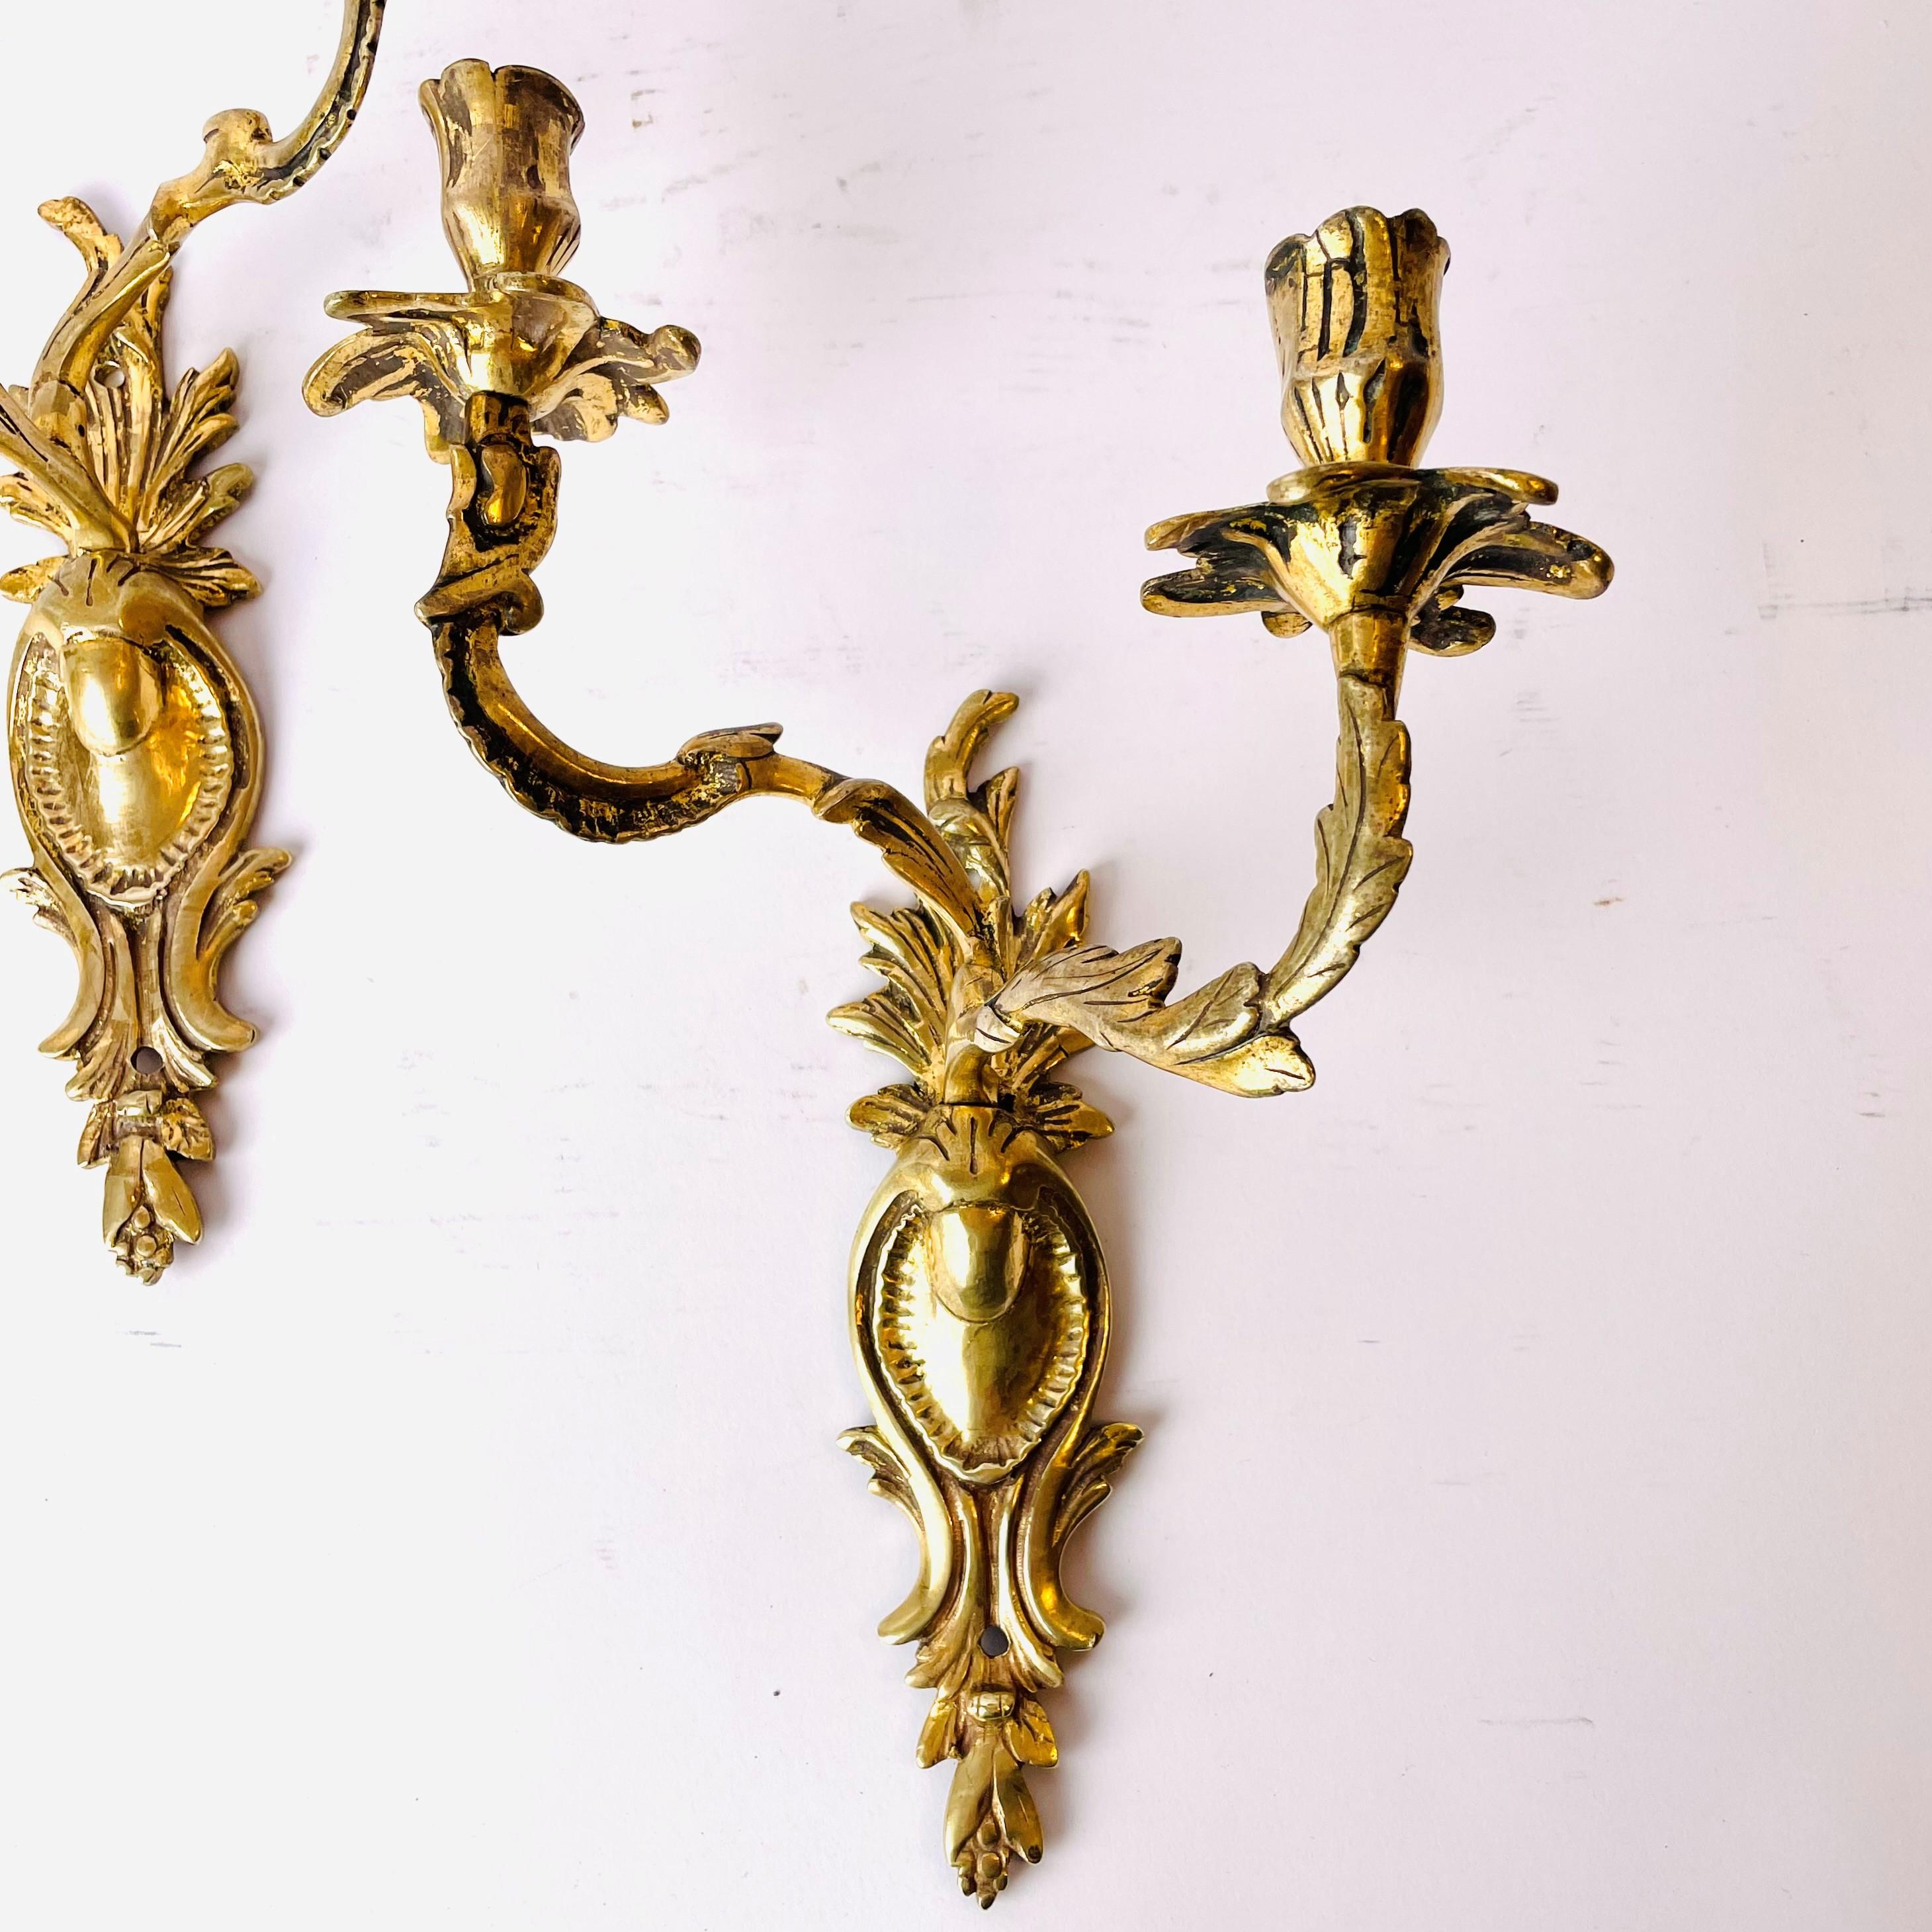 European Pair of Appliques in Gilt Bronze, Rococo, Mid-18th Century For Sale